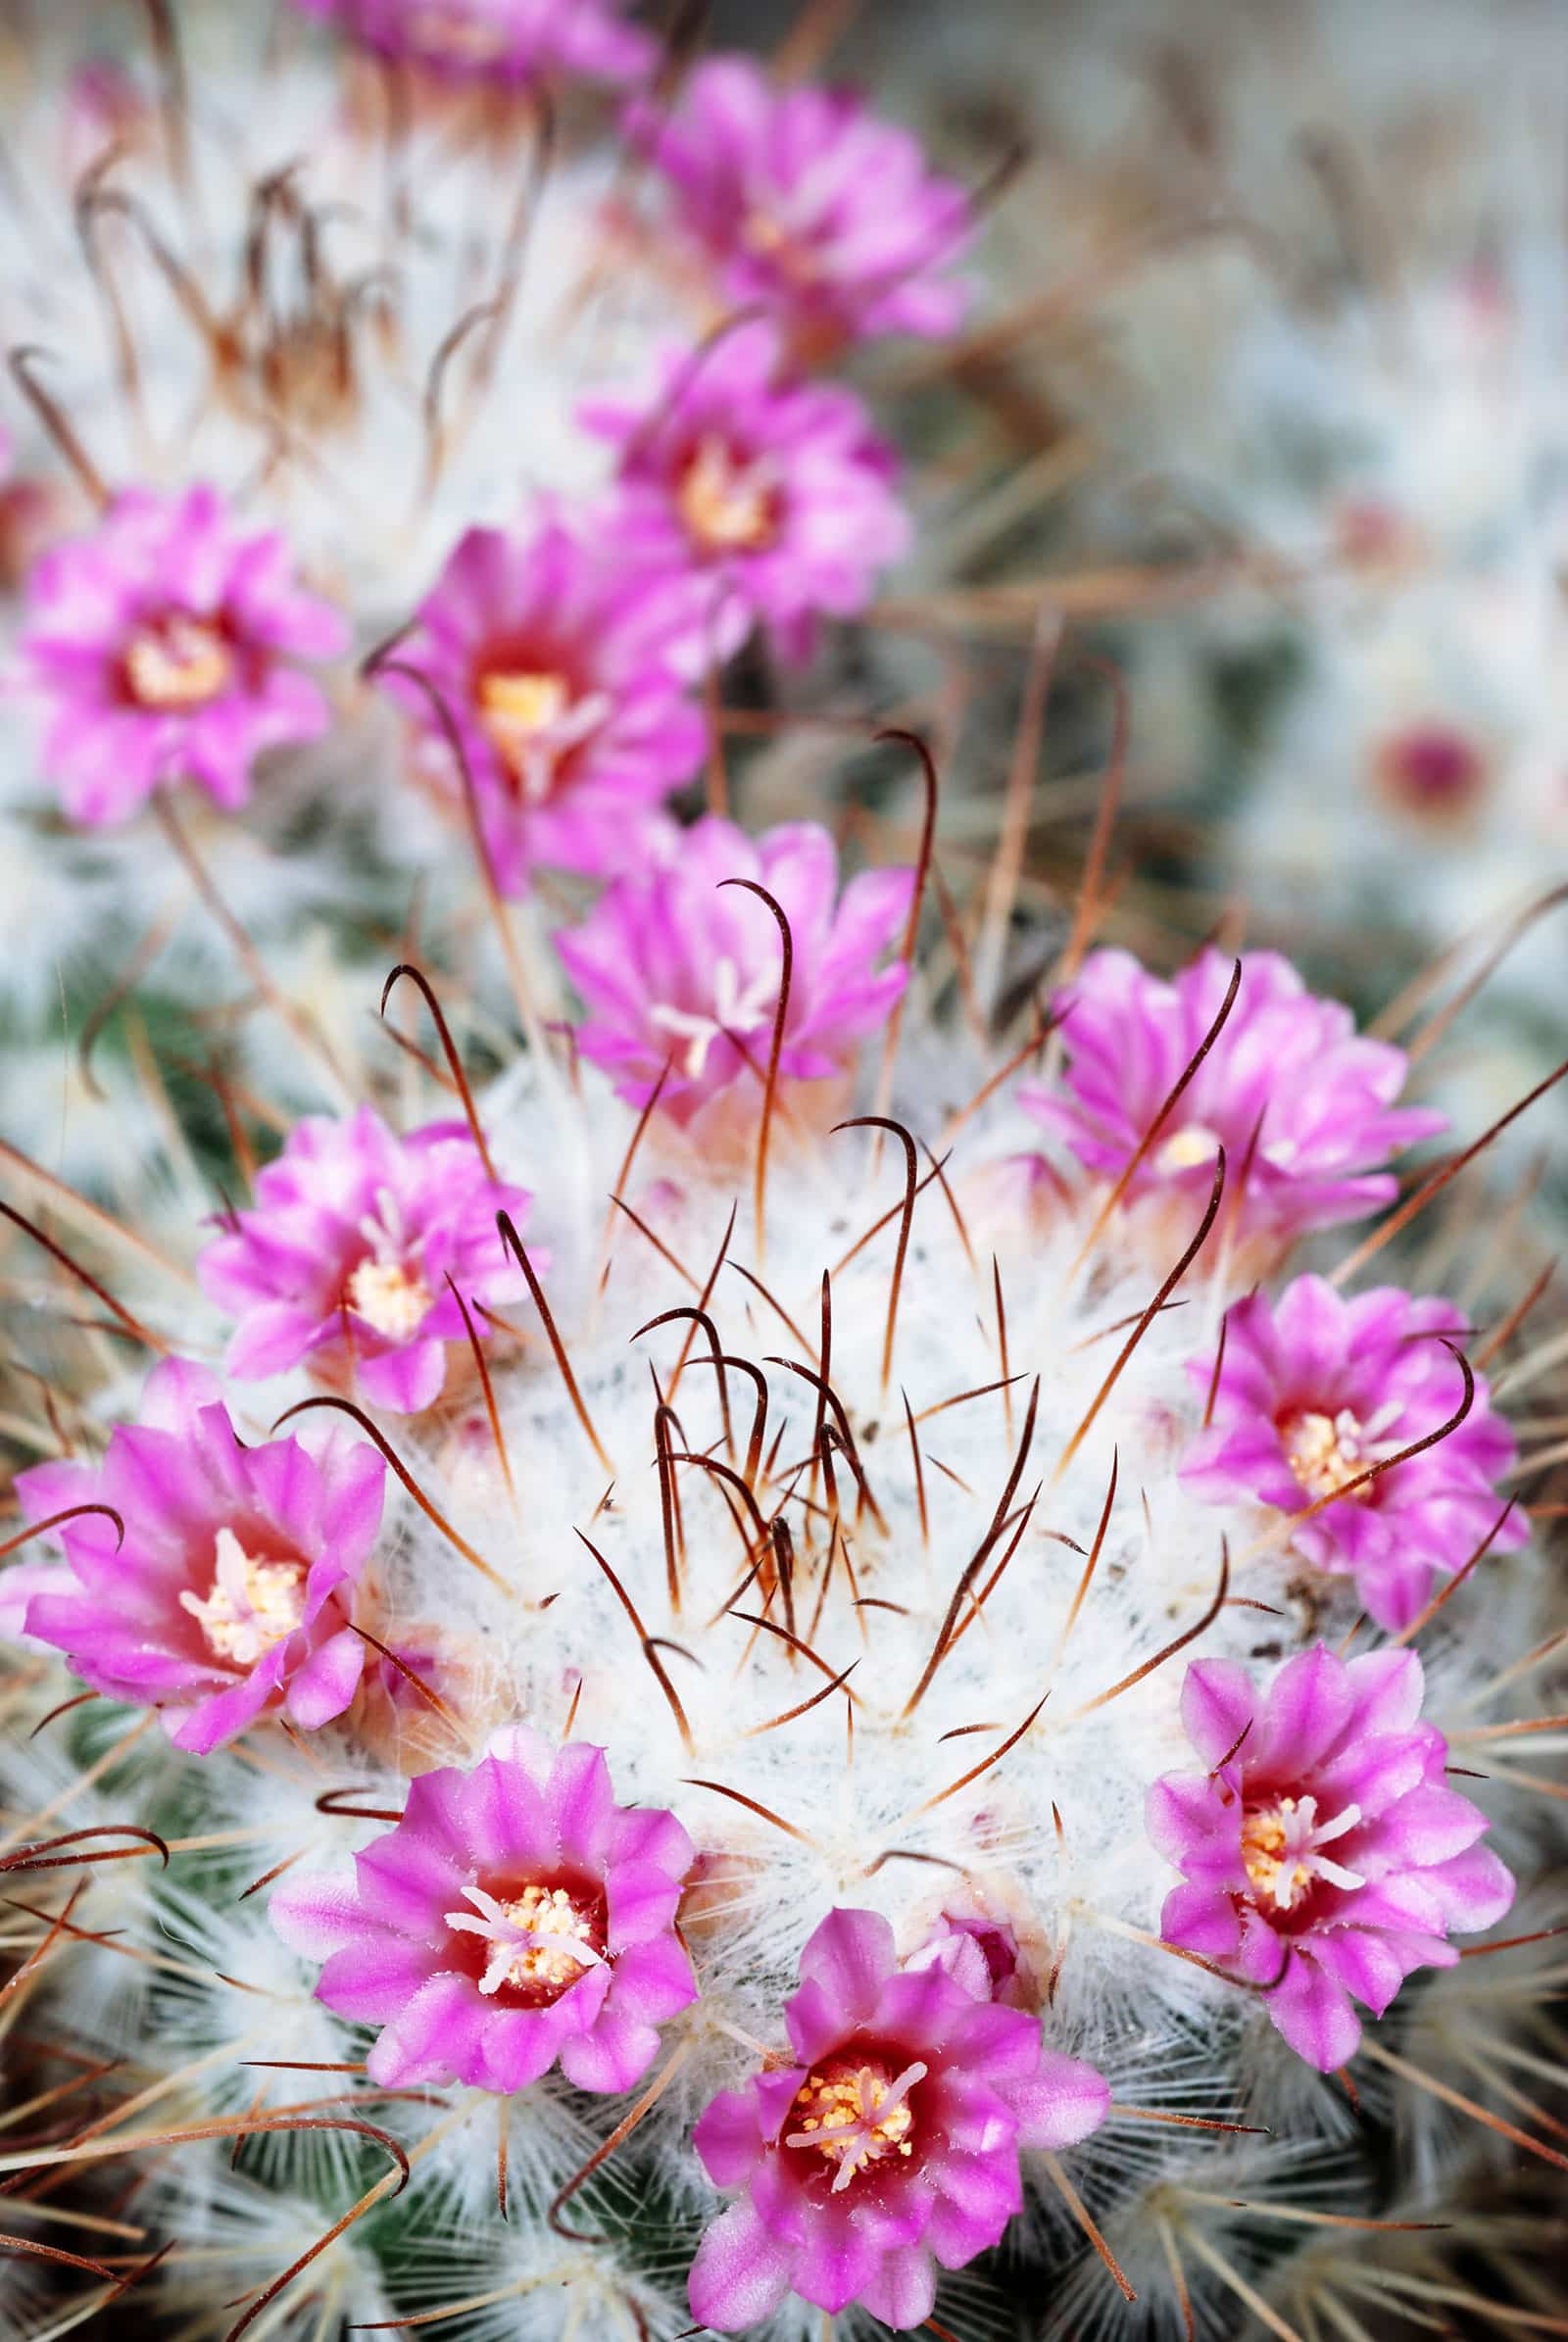 Mammillaria cactus with a crown of pink flowers